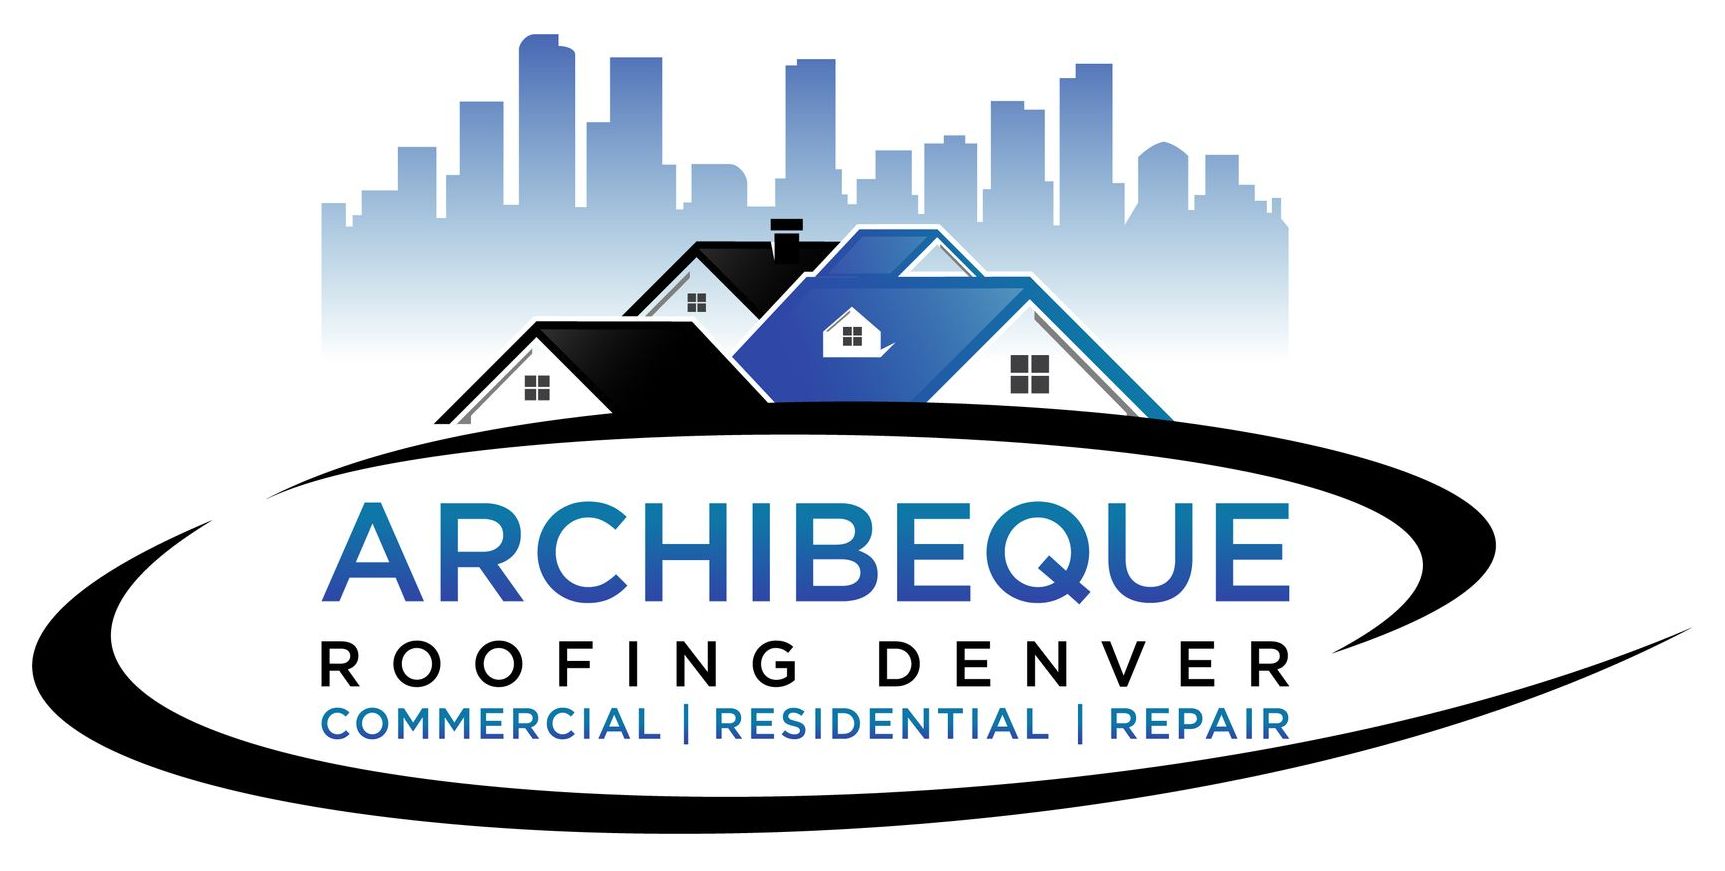 a logo for archibeque roofing denver commercial residential repair